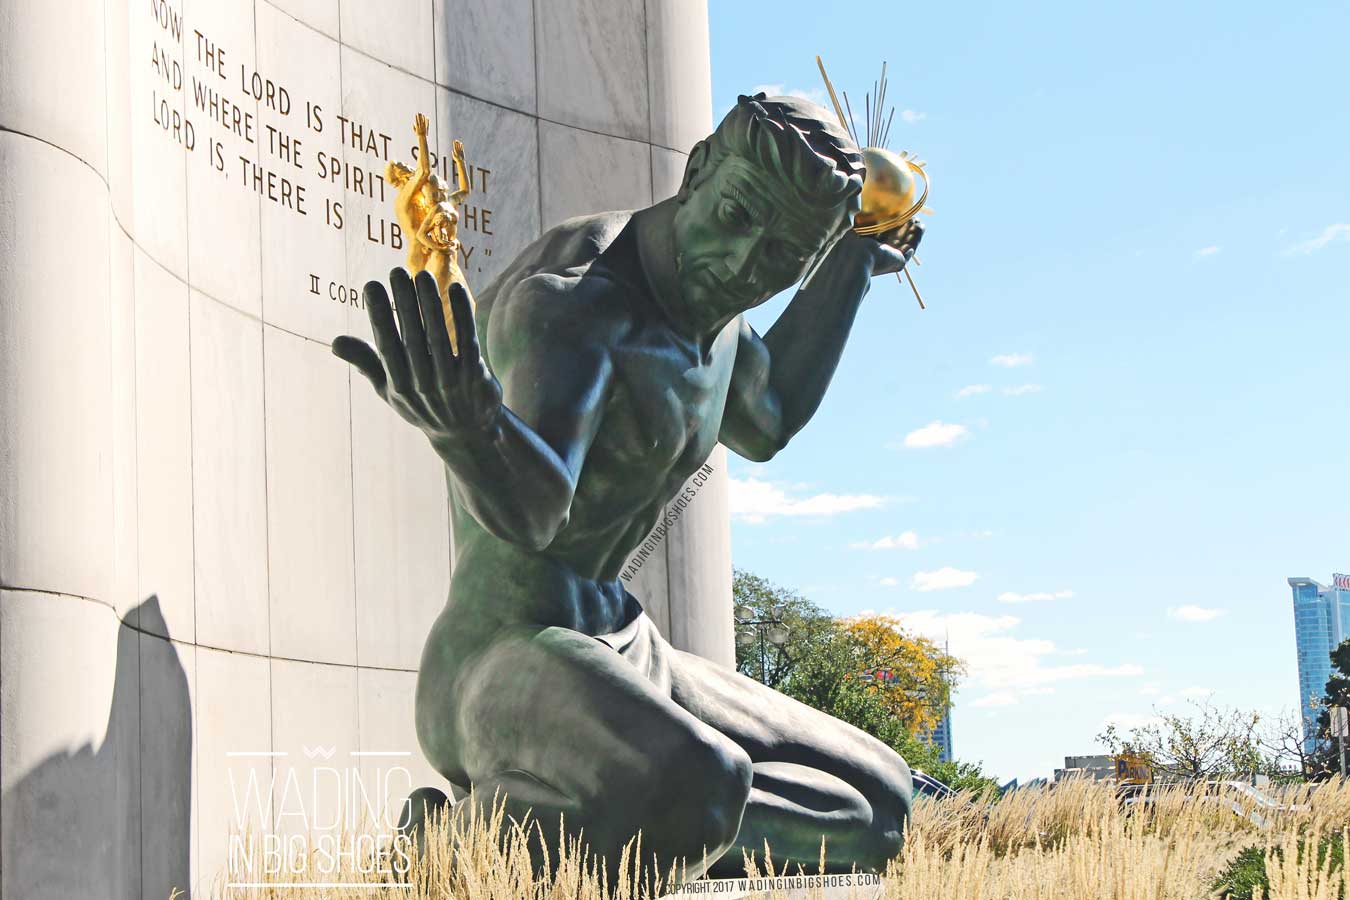 Things To Do In Detroit: Visit The Spirit Of Detroit Statue // (via Wading in Big Shoes) // Don't miss The Spirit of Detroit, located on Woodward Avenue in downtown Detroit. Commissioned in 1955, this bronze and marble statue is in front of the Coleman A. Young Center and makes a great backdrop for Detroit photos.